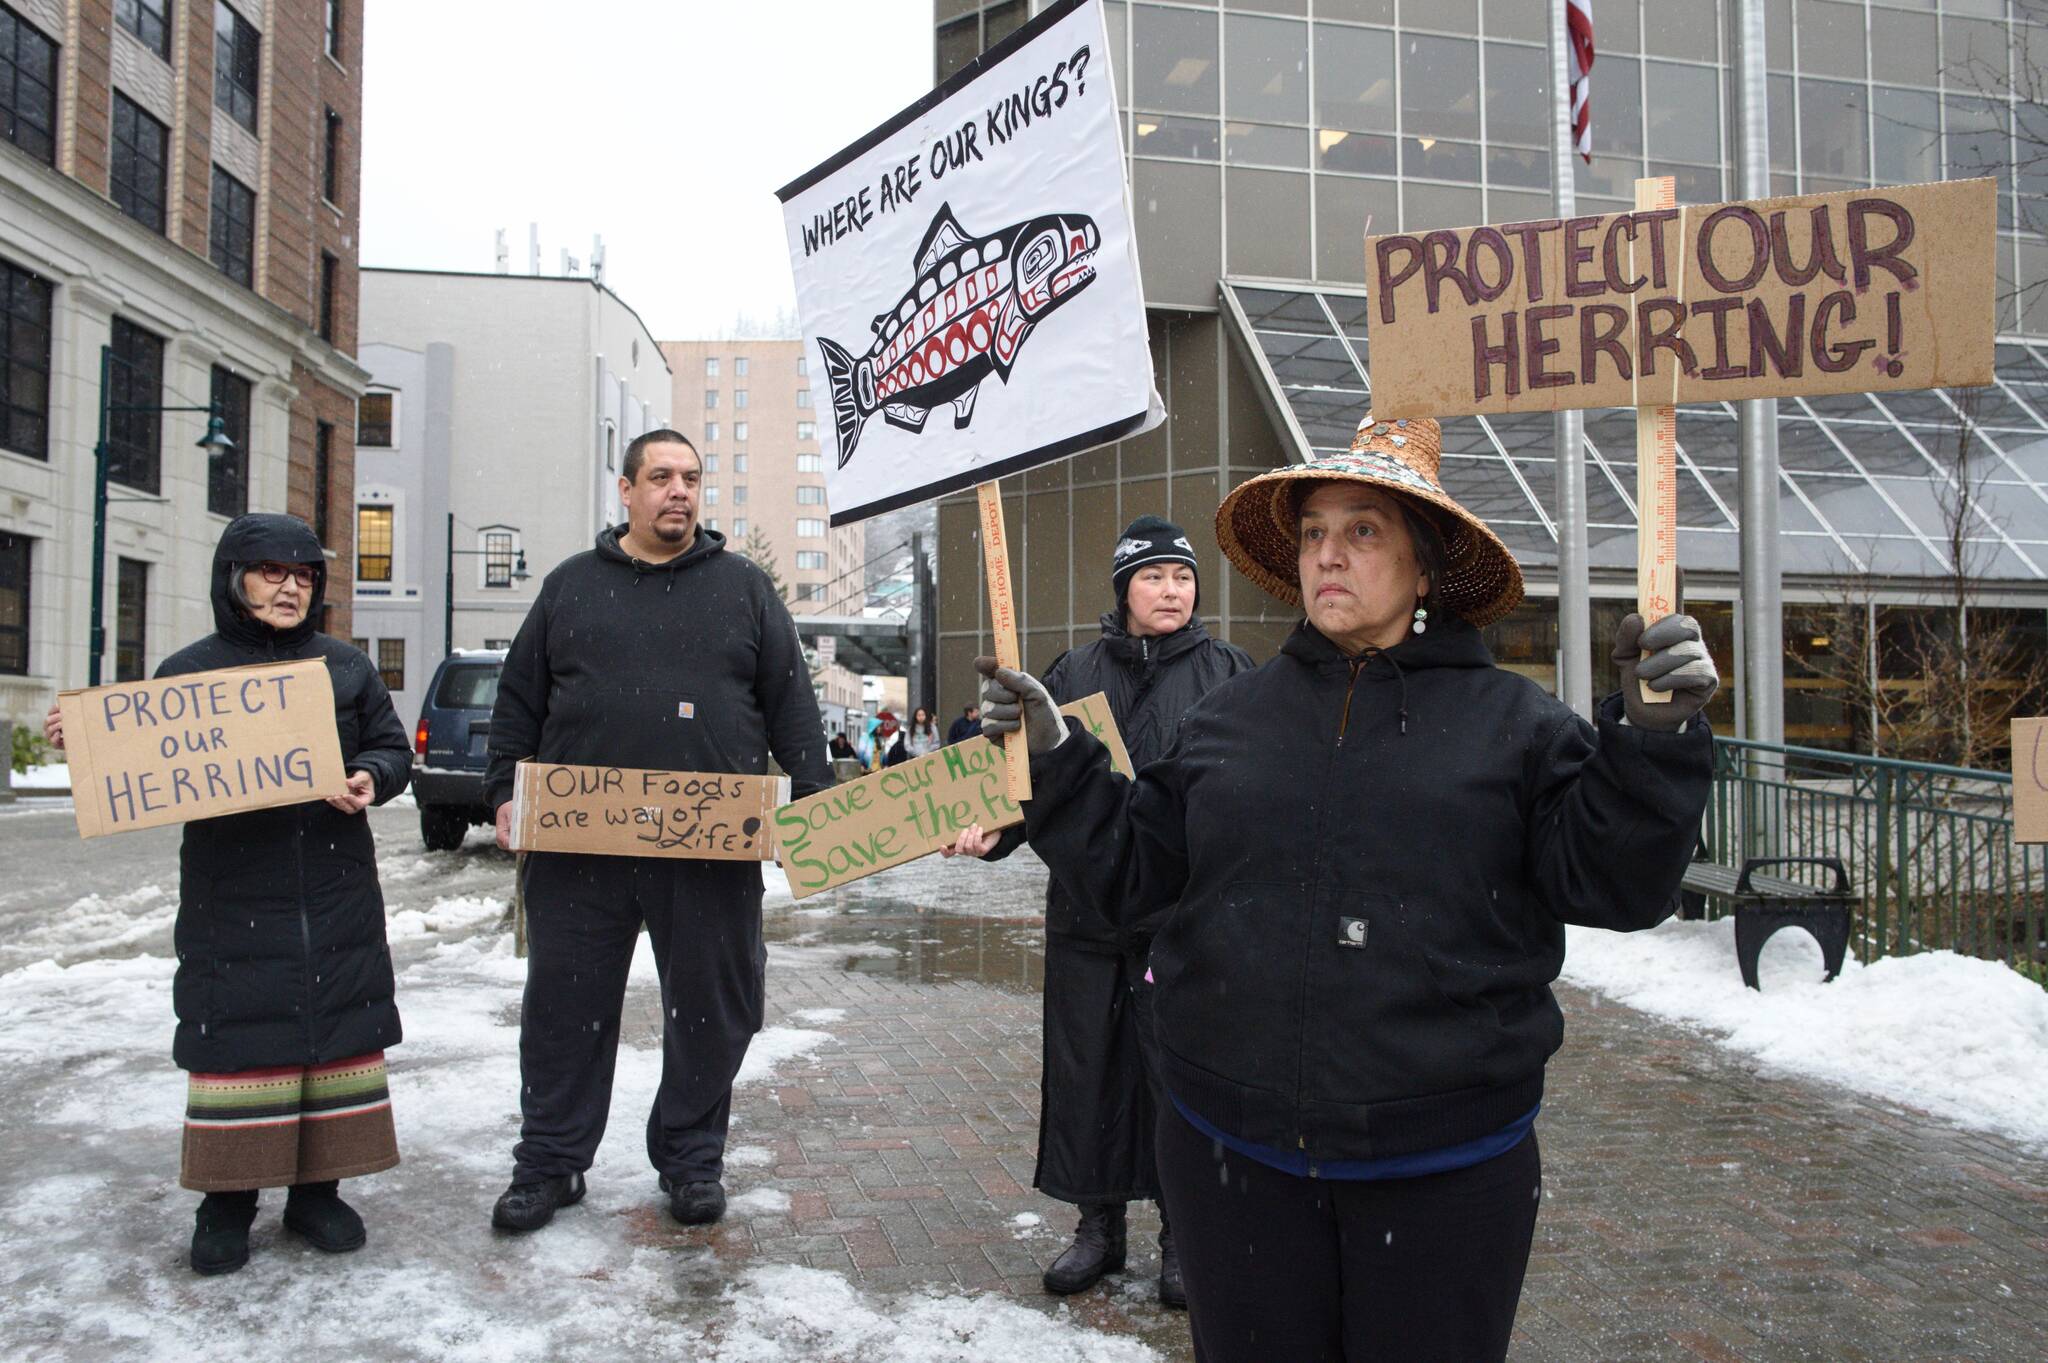 Nancy Keen (right), Vivian Mork, Marvin Willard and Rosita Worl (left) protest outside the Dimond Courthouse as a court hearing between the Sitka Tribe of Alaska and the Department of Fish and Game on herring limits in Sitka Sound takes place inside on Tuesday, Feb. 18, 2019. (Michael Penn / Juneau Empire File)